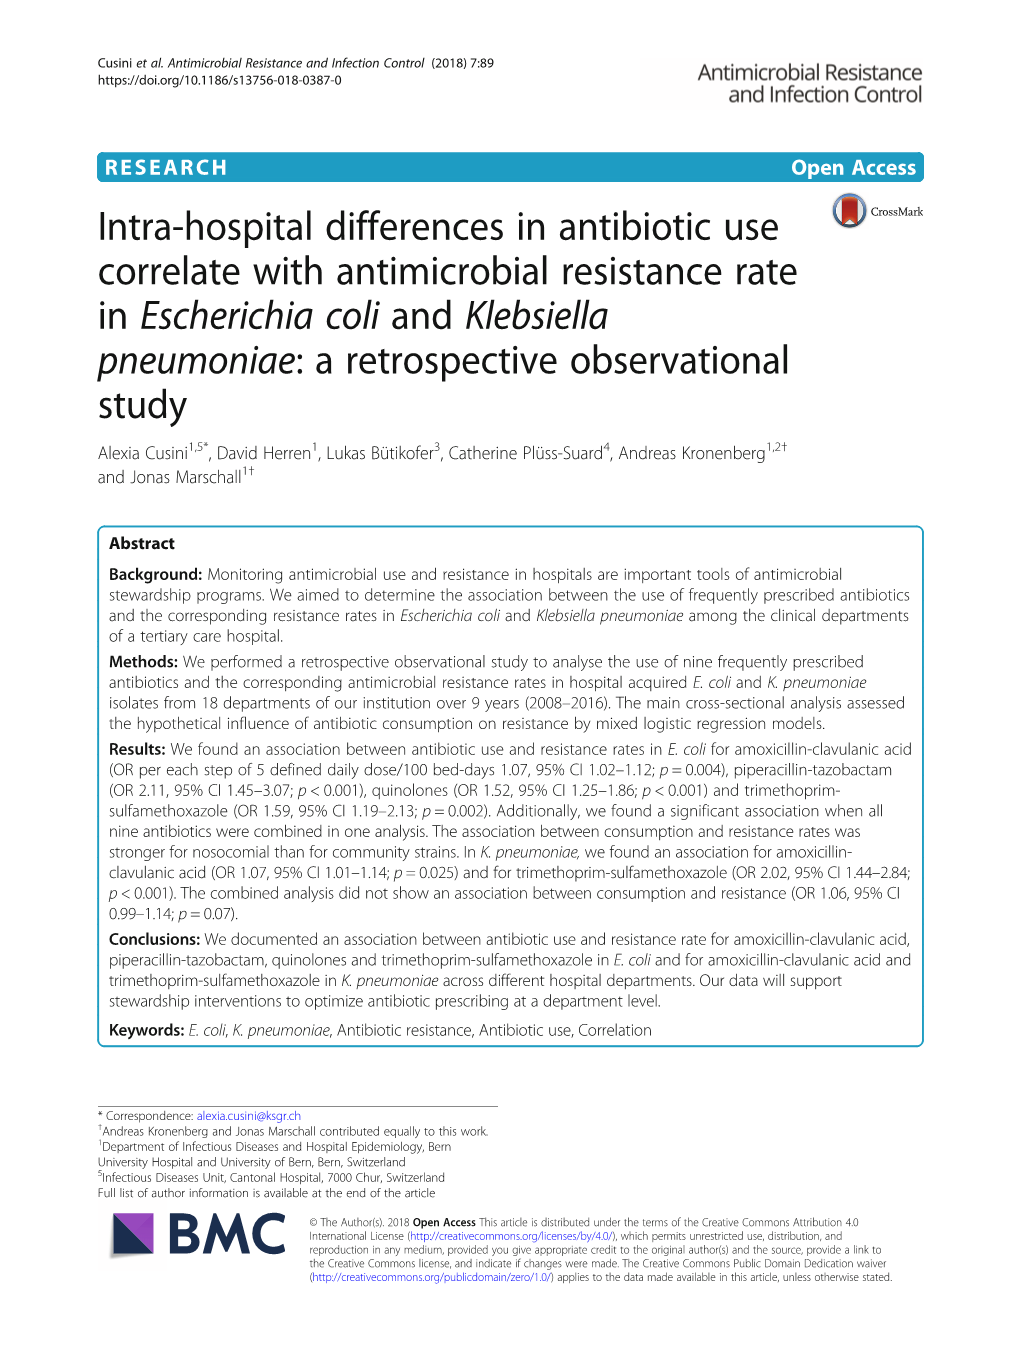 Intra-Hospital Differences in Antibiotic Use Correlate with Antimicrobial